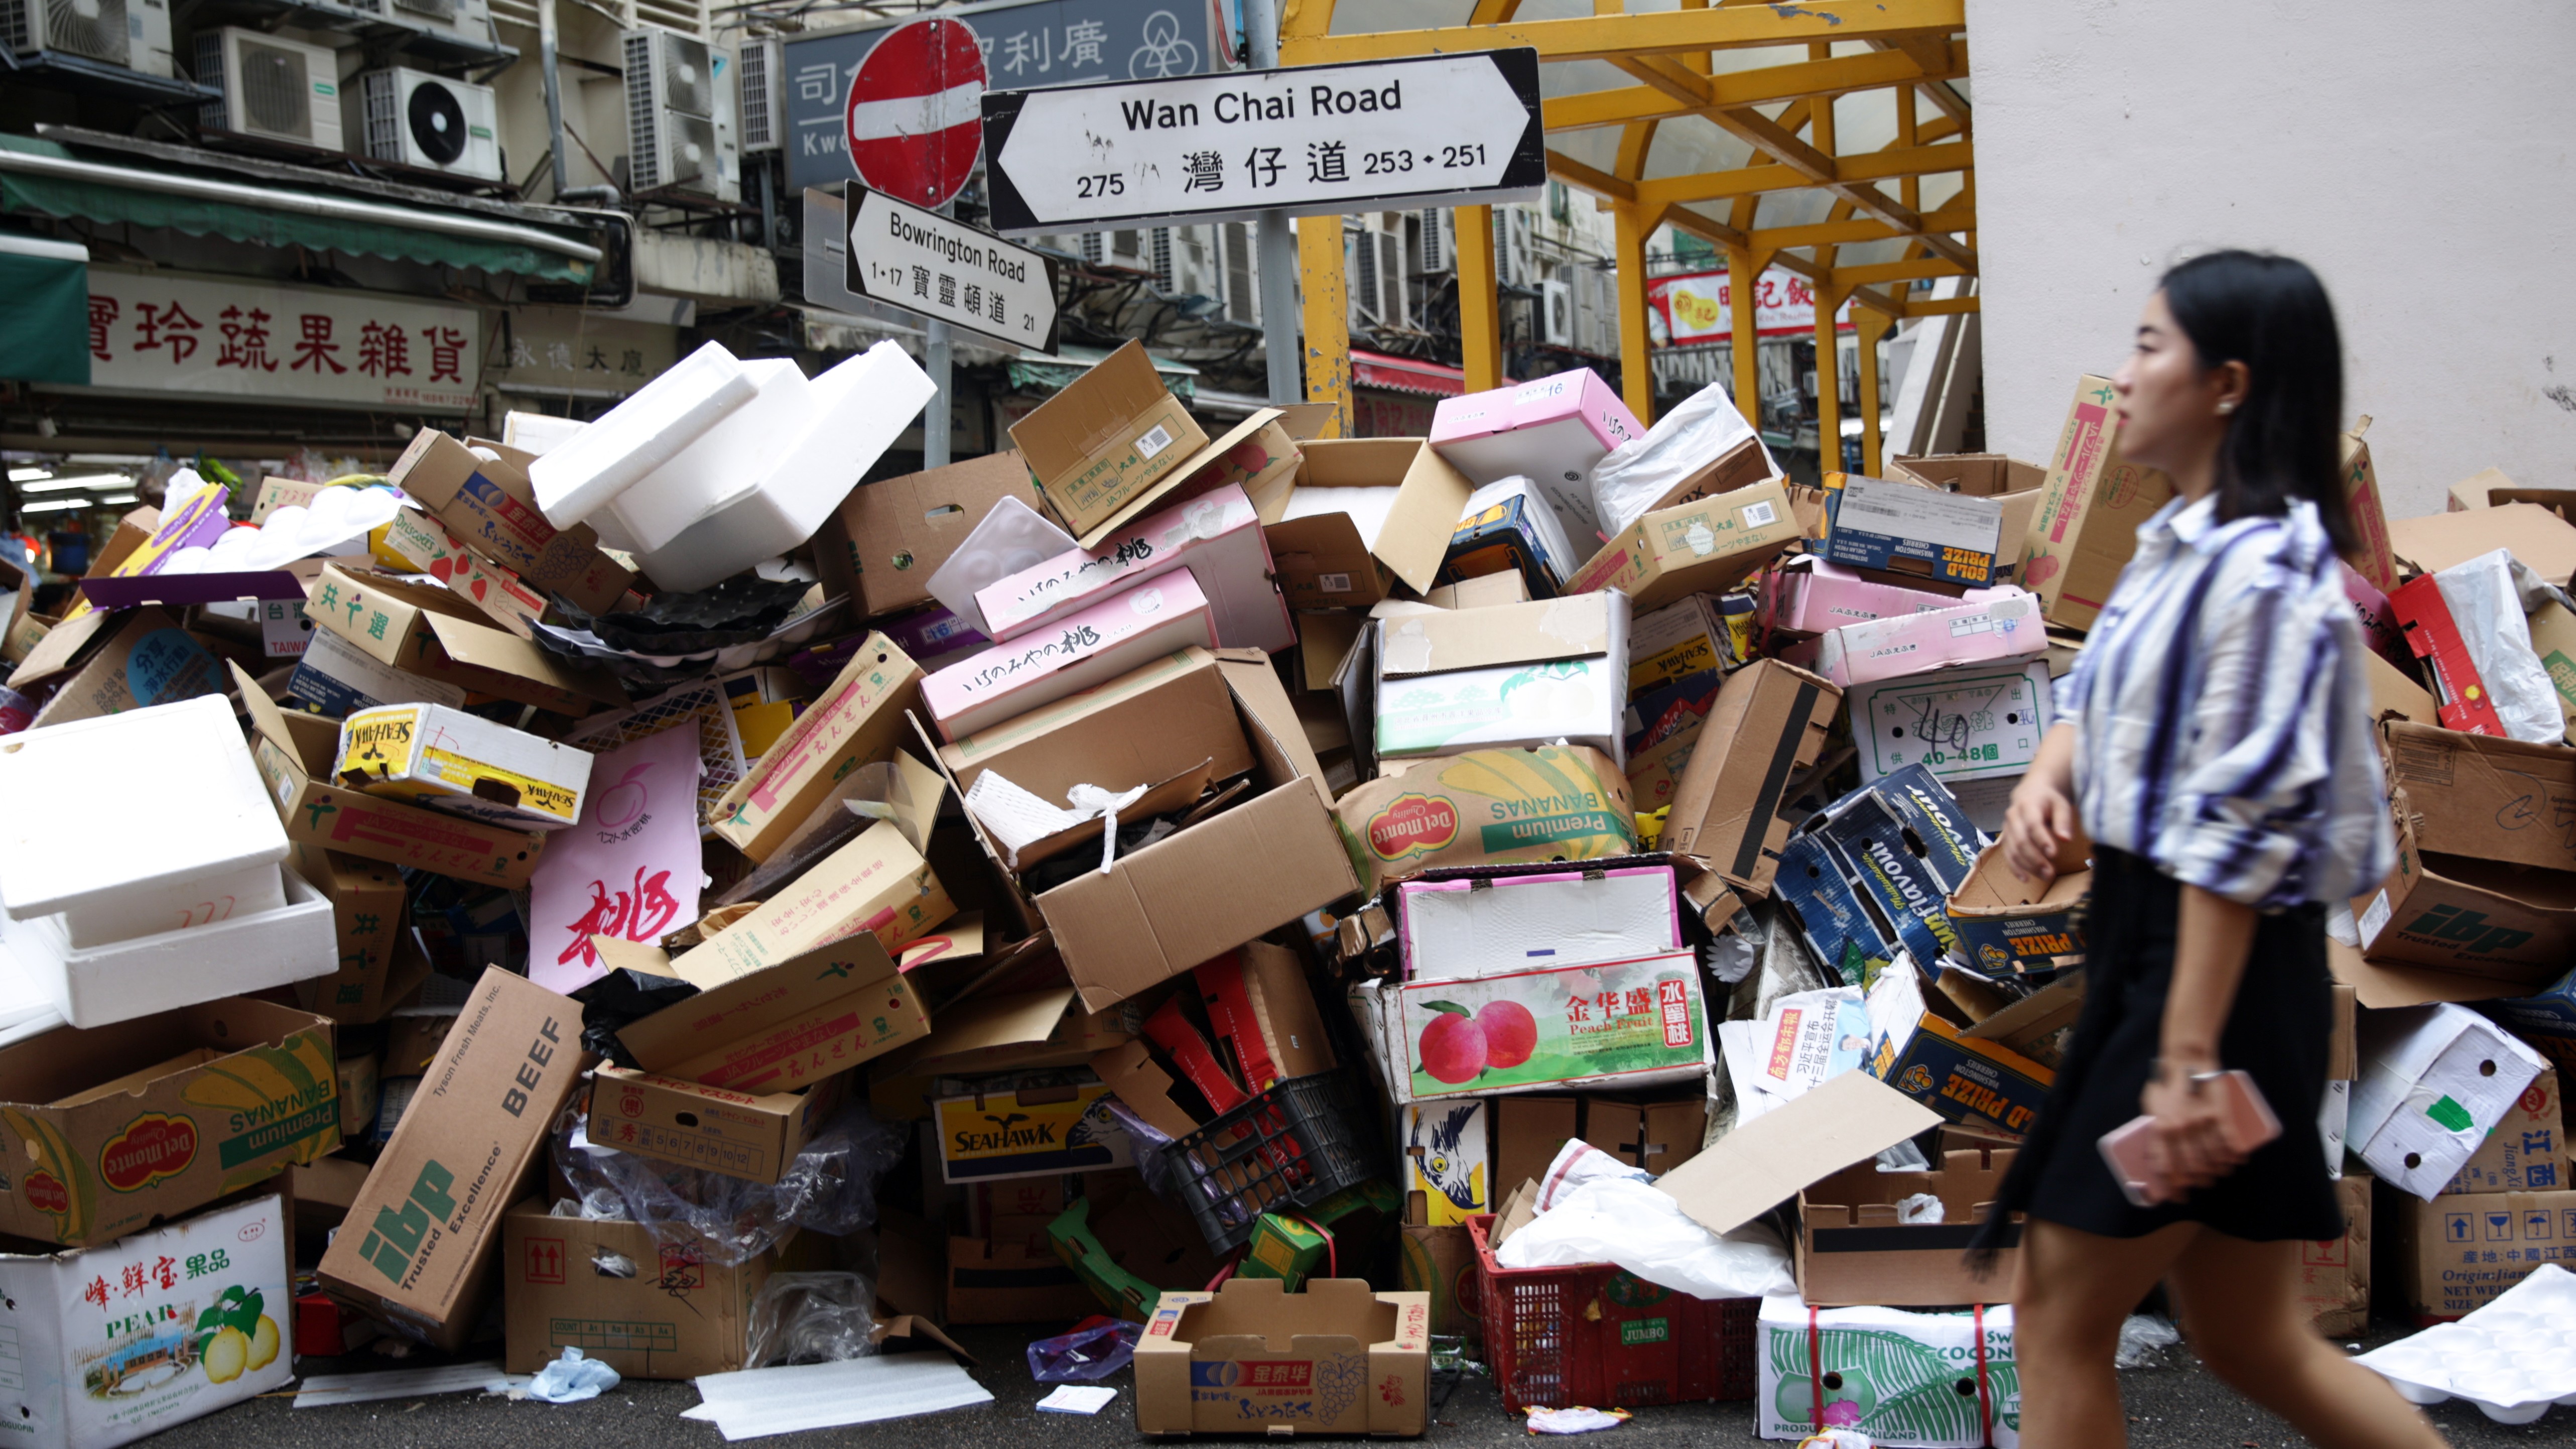 Waste boxes piled at a street corner in Wan Chai on Wednesday. Photo: Sam Tsang